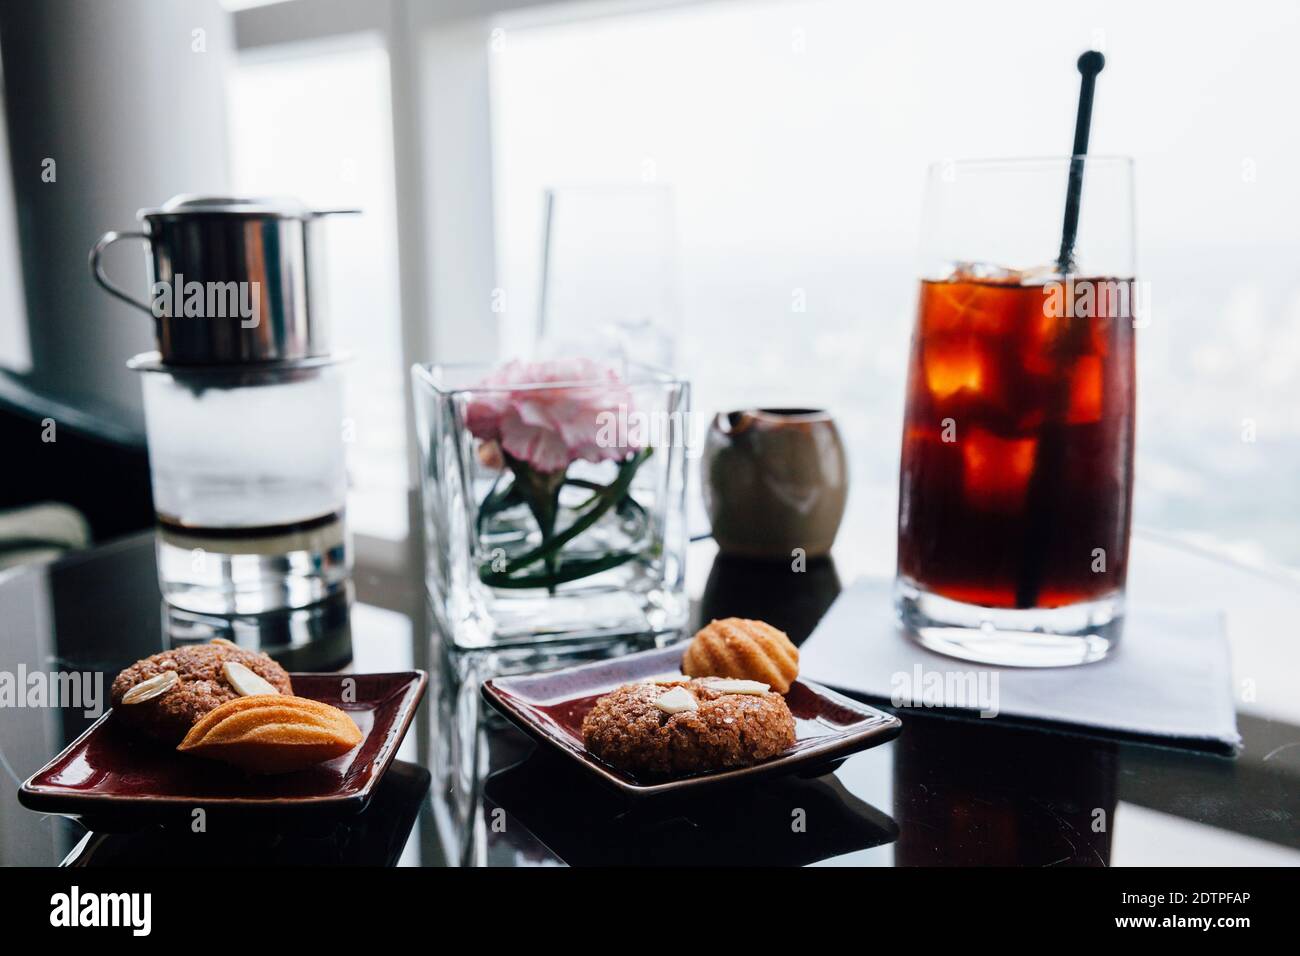 Hot and iced filtered Vietnamese coffee served with biscuits on the table. Stock Photo